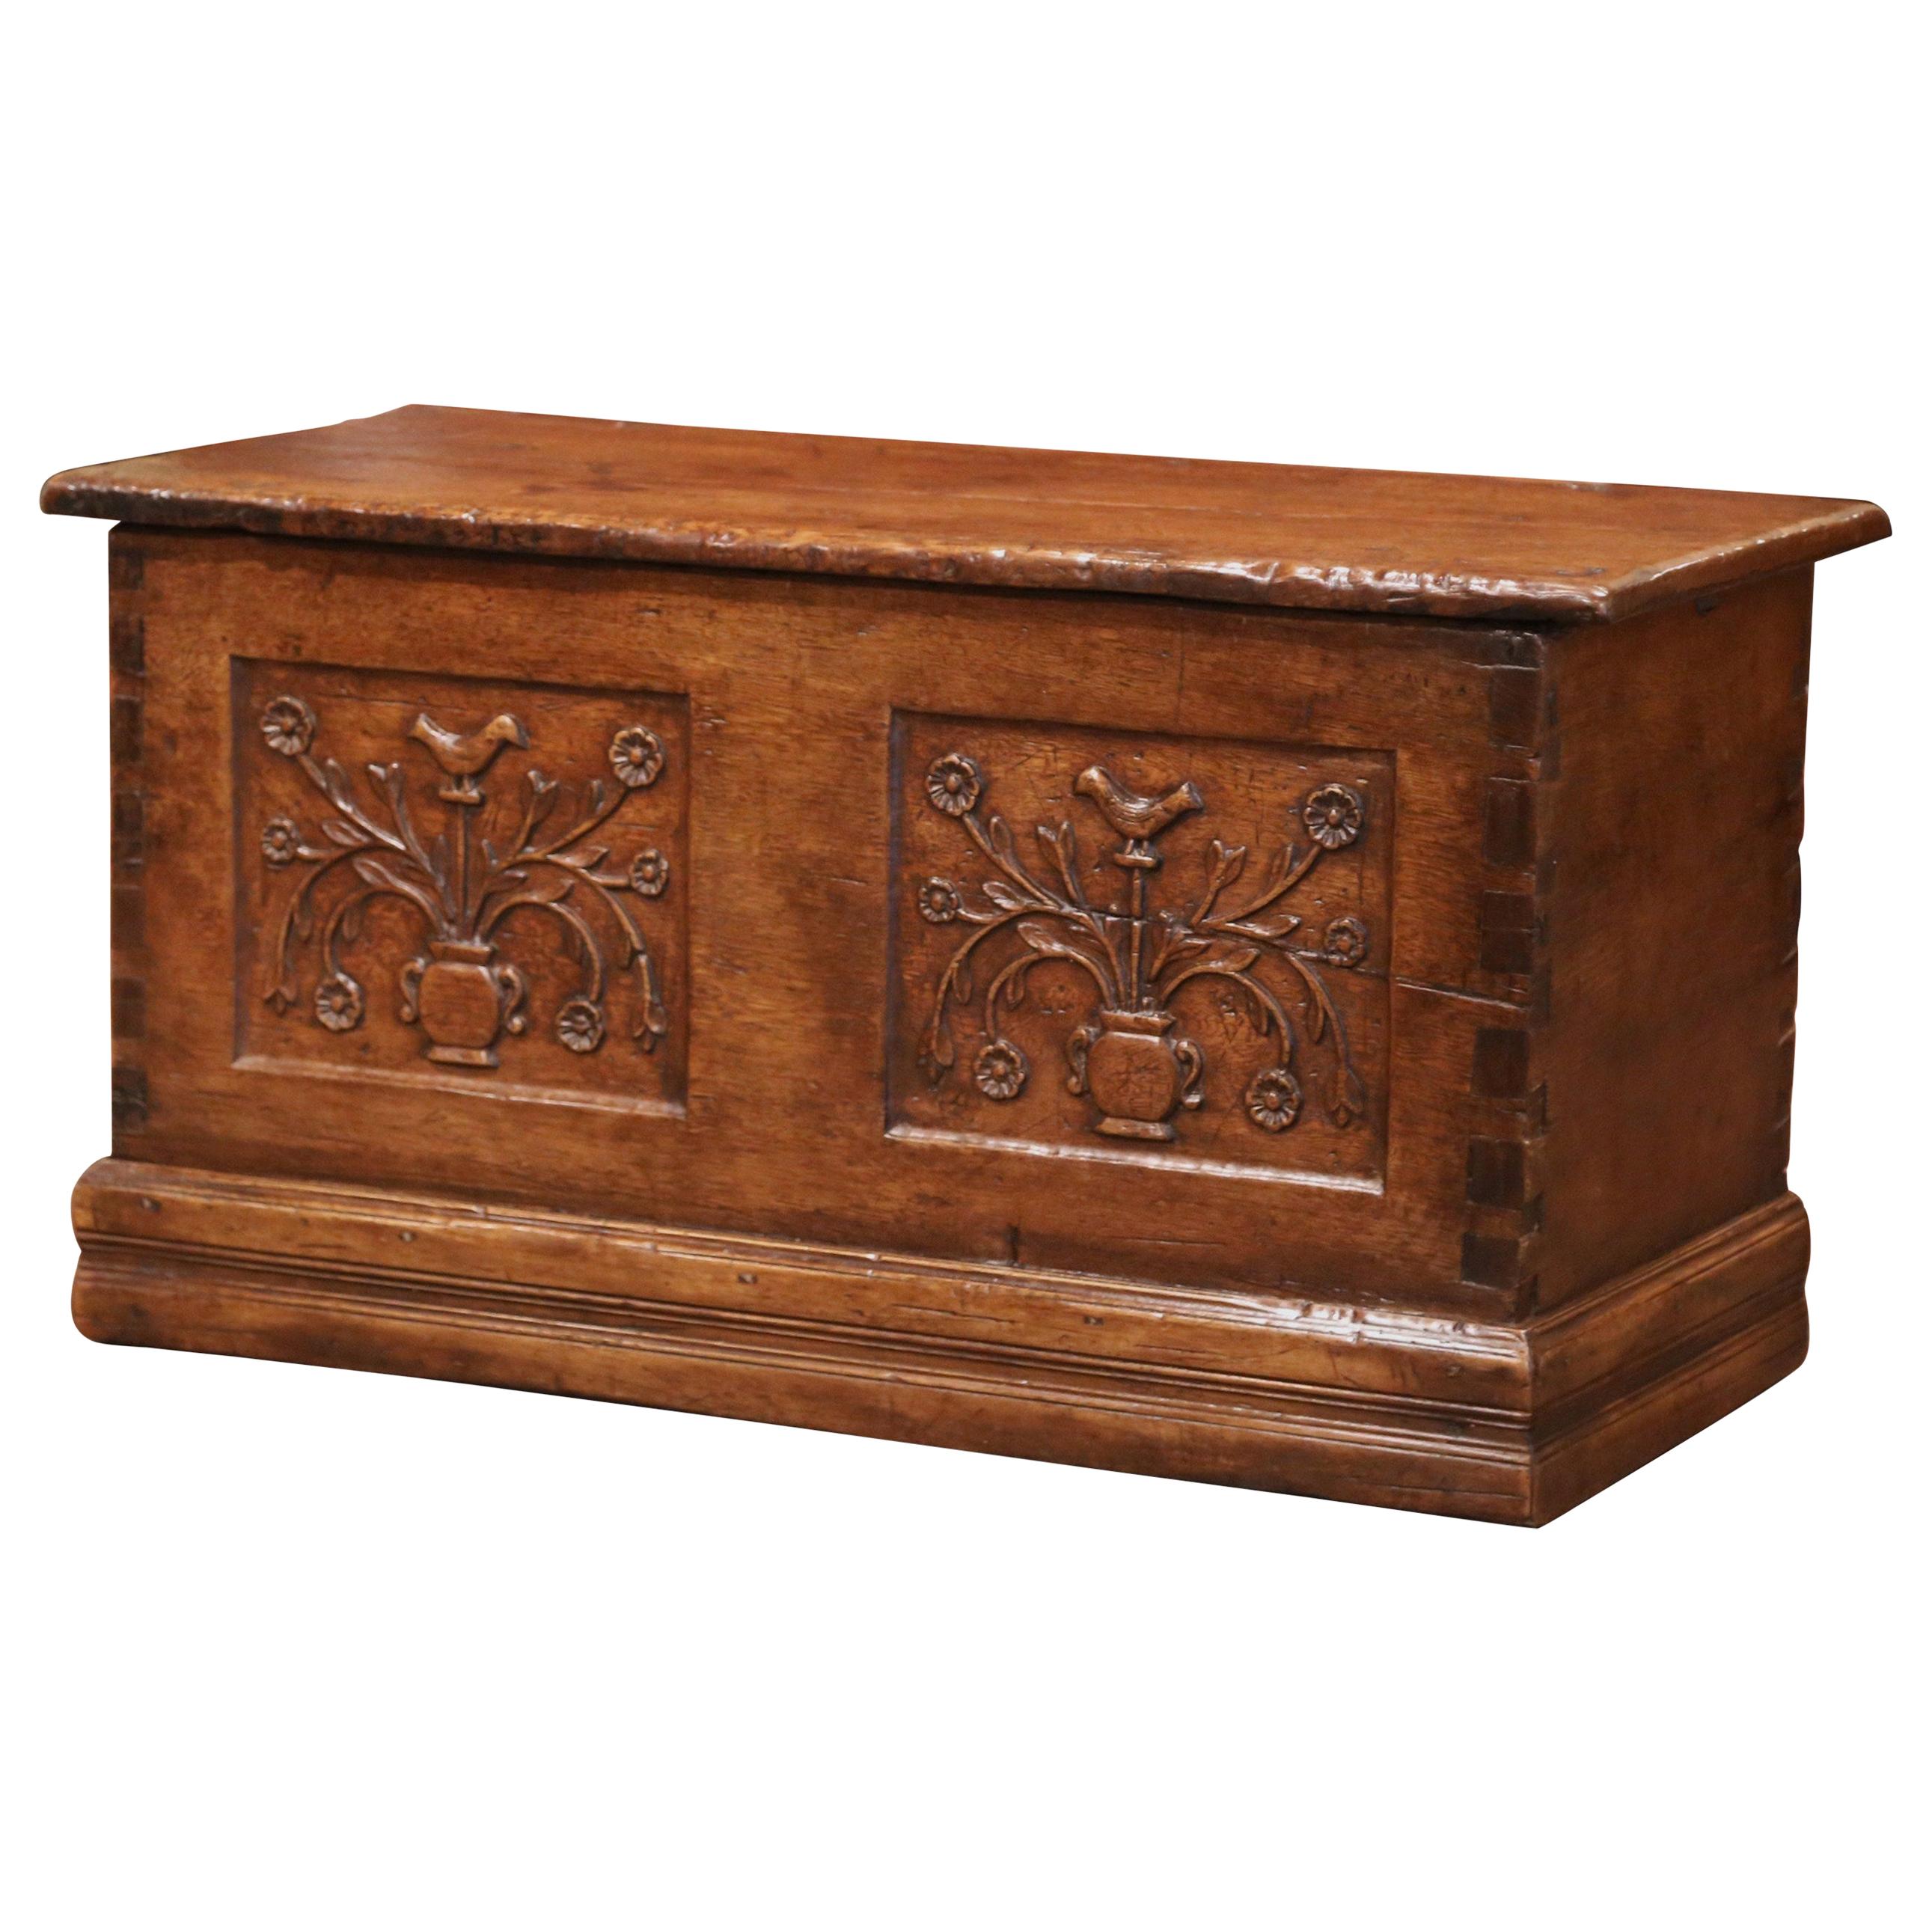 18th Century French Louis XIII Carved Chestnut Coffer Trunk from the Pyrenees